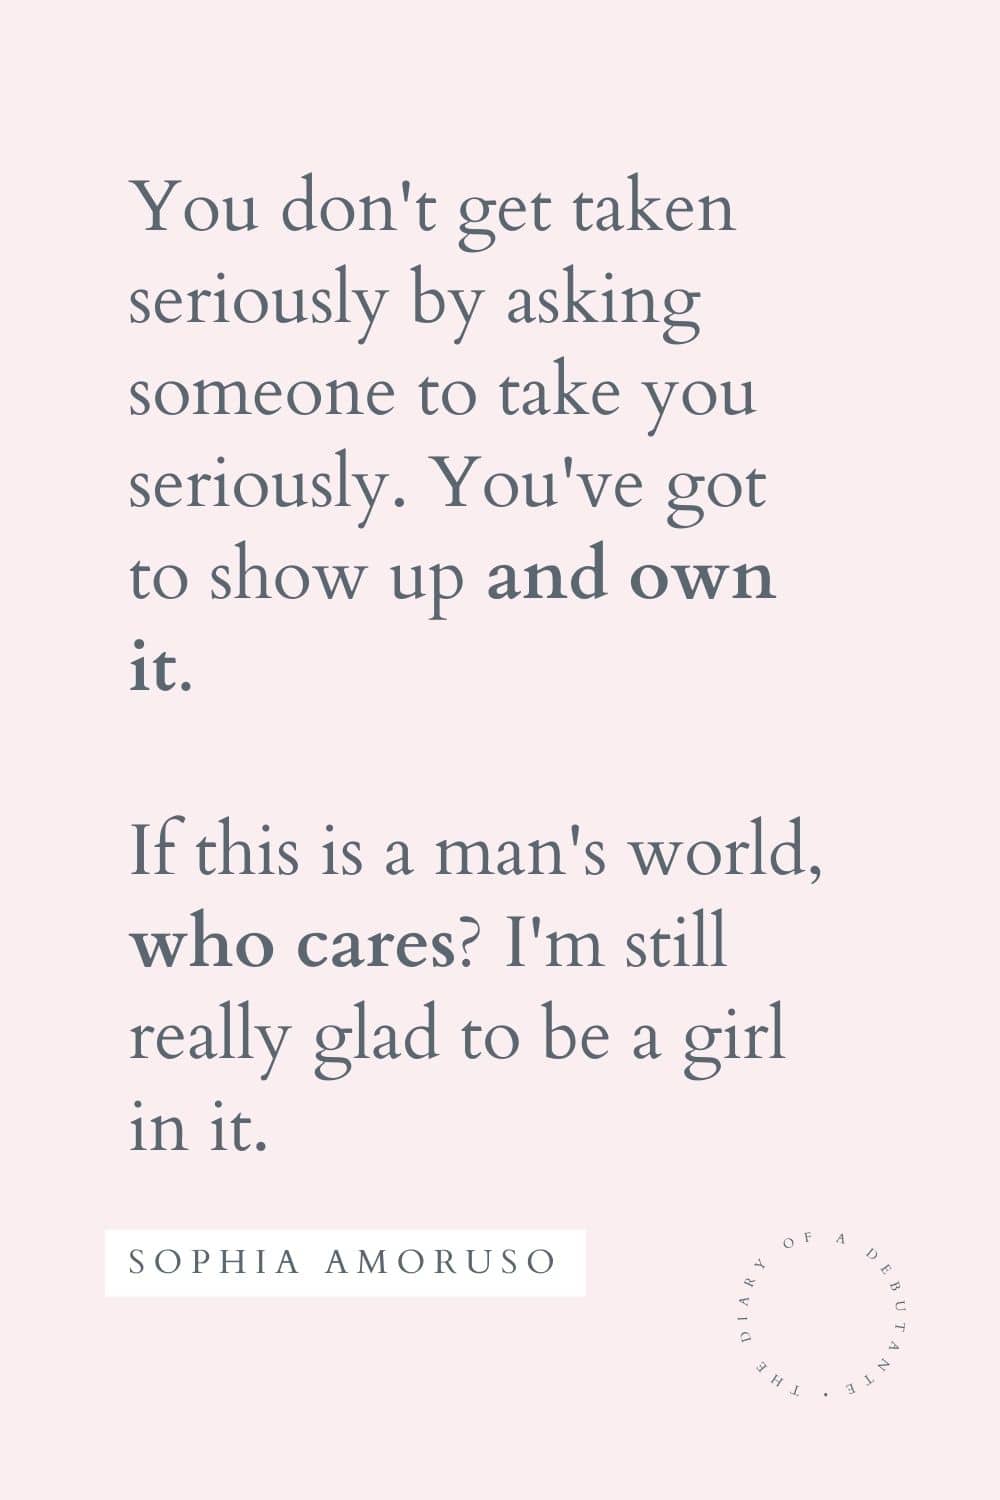 Sophia Amoruso quote curated as part of a collection of female quotes for encouragement by blogger Stephanie Ziajka on Diary of a Debutante